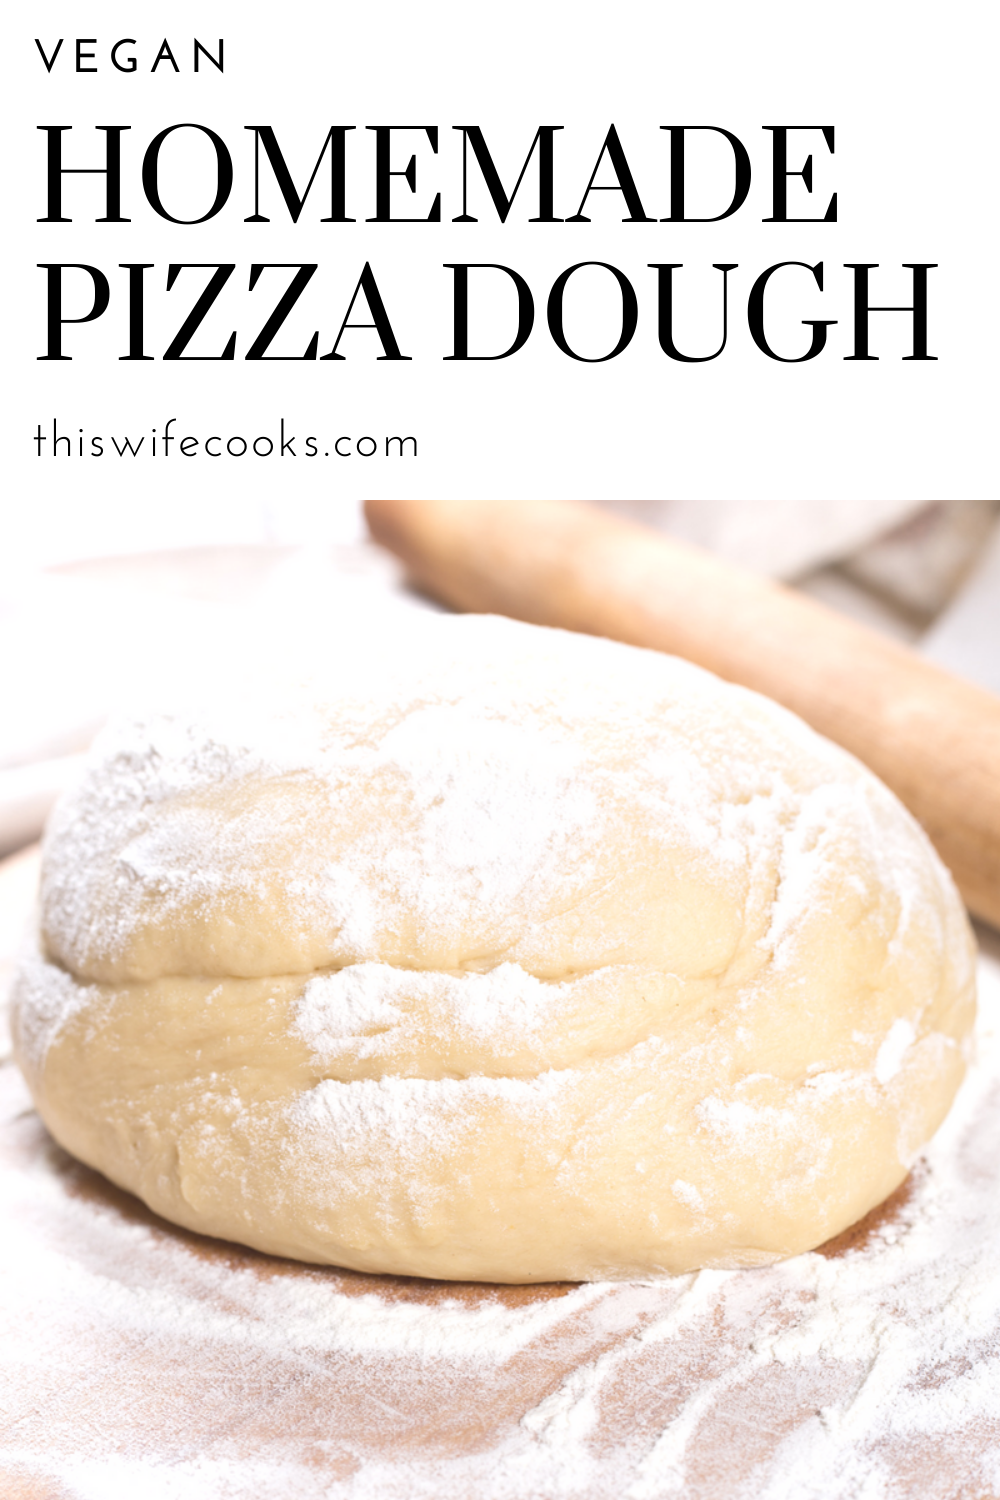 Homemade Pizza Dough - So quick and easy! The dough comes together in a snap. Perfect for your next pizza night at home!  via @thiswifecooks